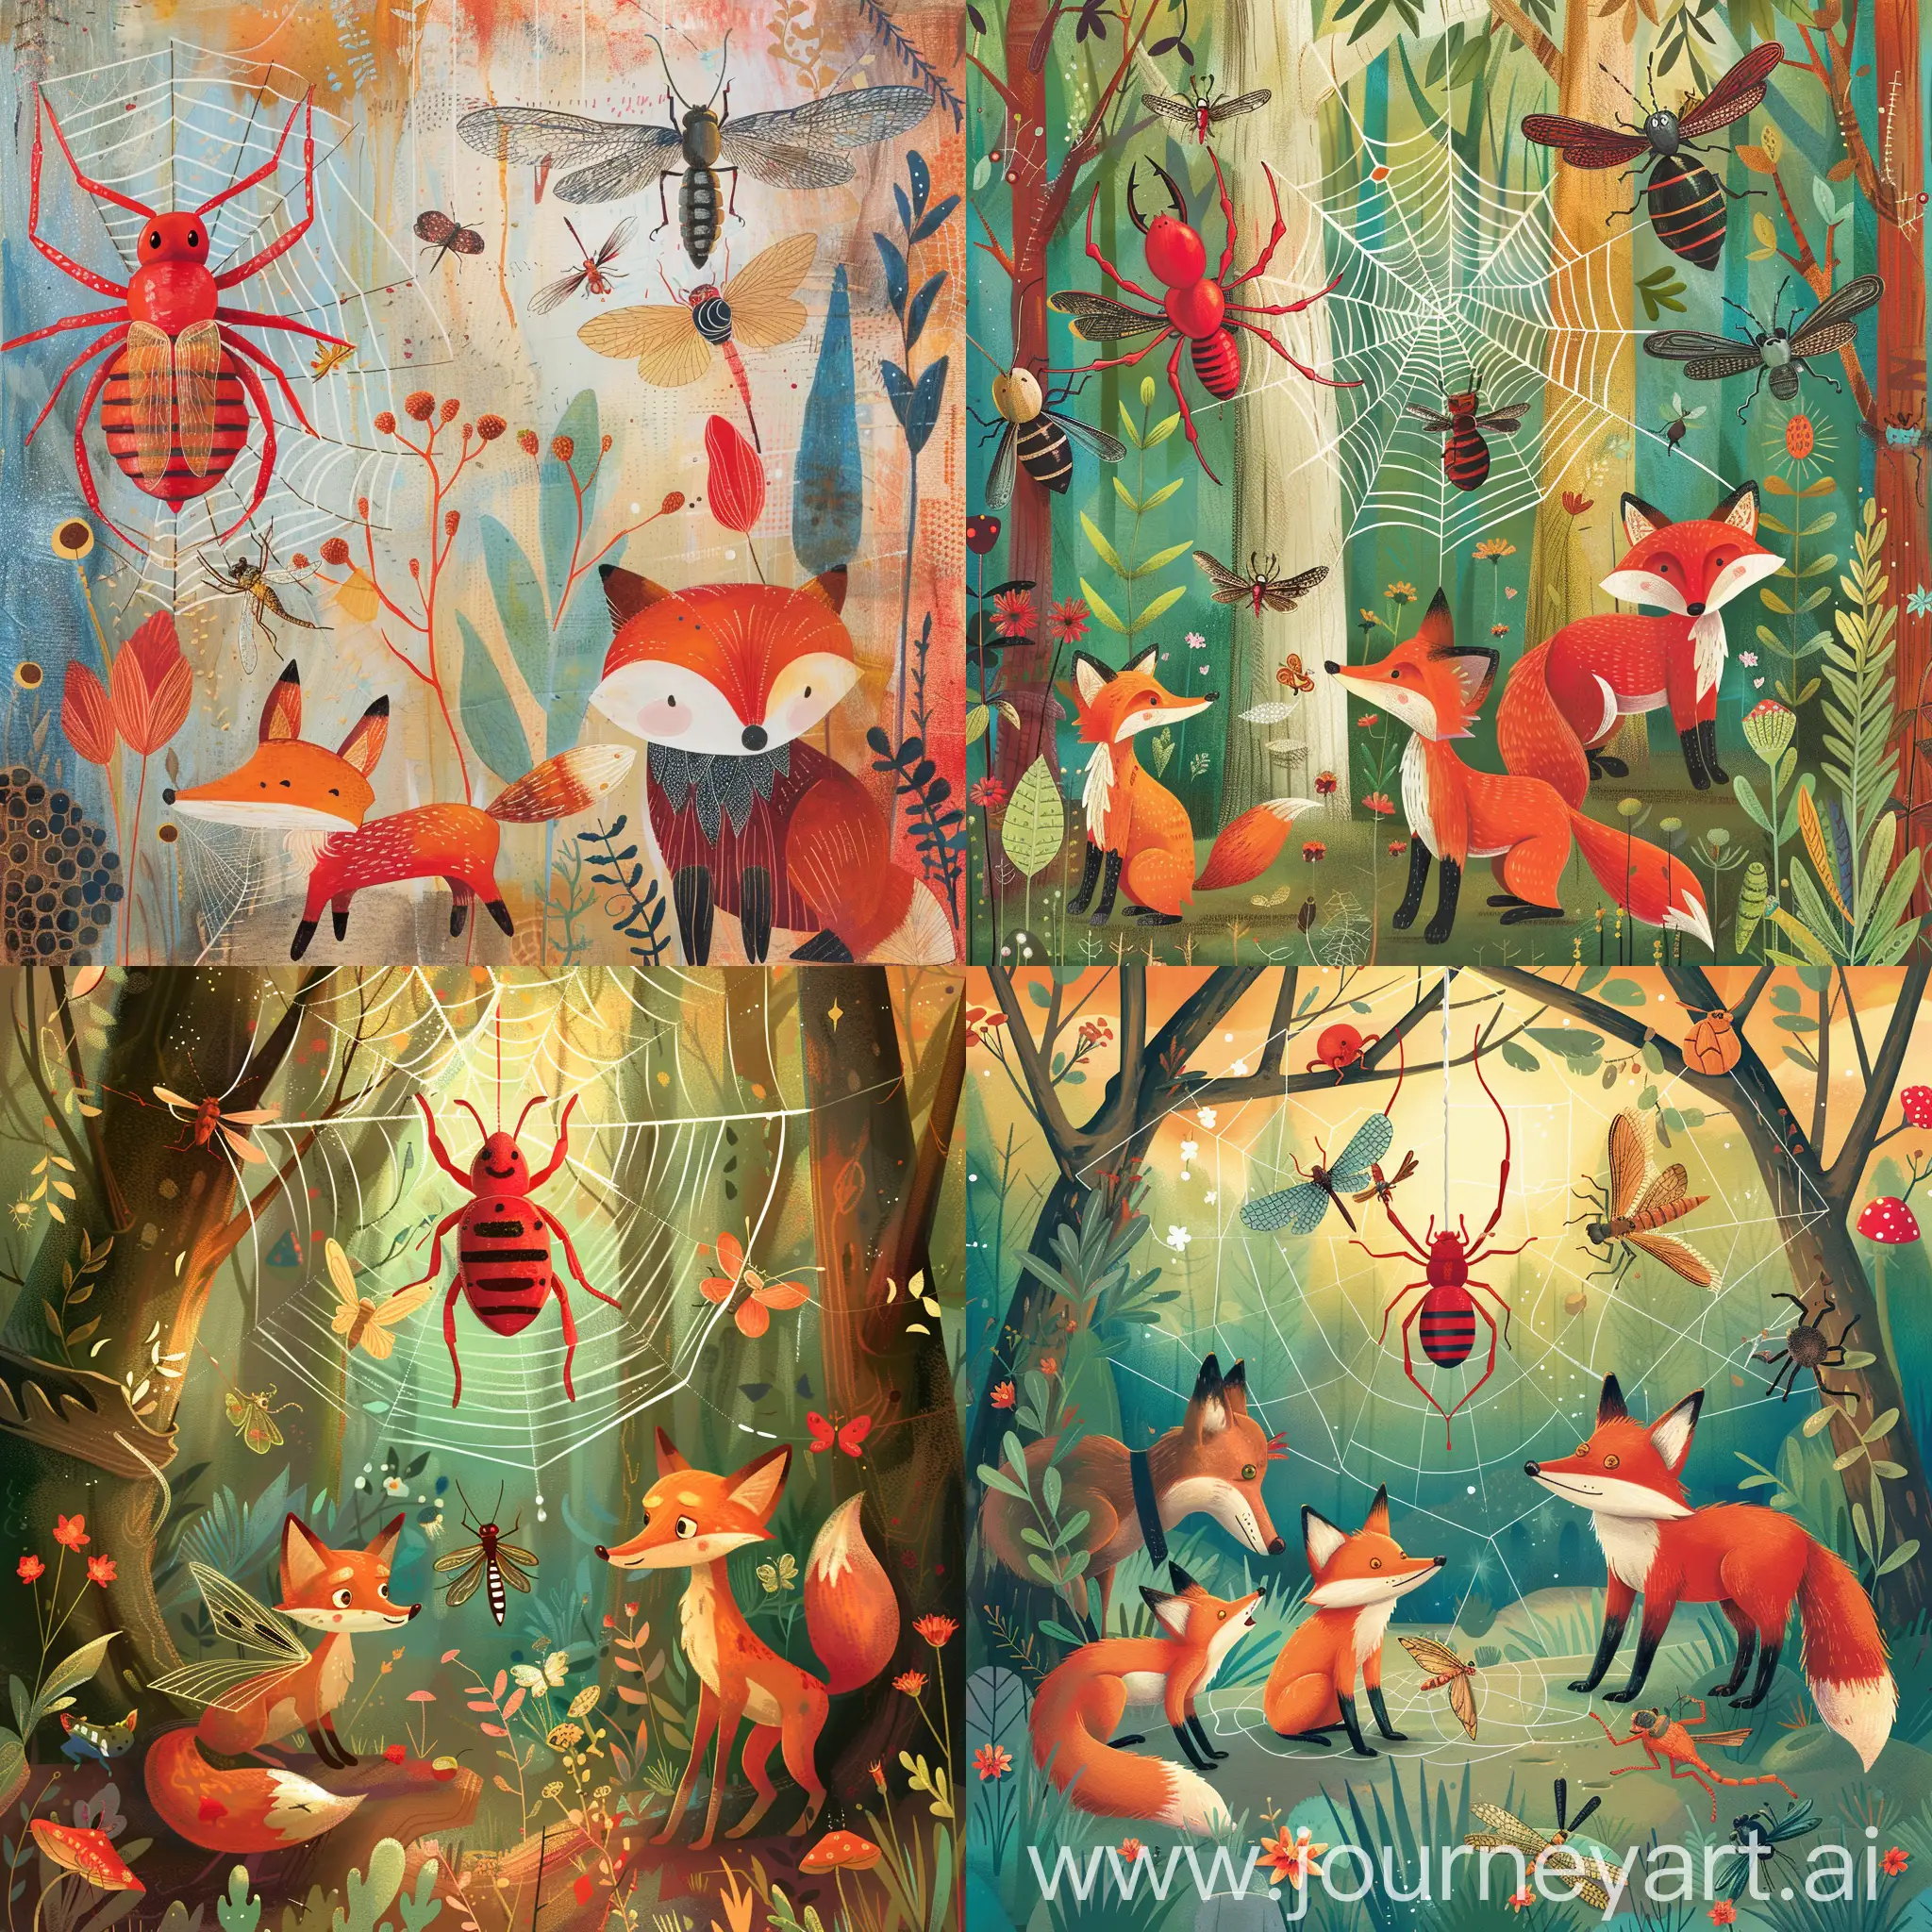 Designed in the style of a "woodland animal fairy tale ((red spider hanging from a web))" (focus), featuring enchanting and friendly scarabs, foxes, dragonflies, mythical creatures, and whimsical characters on a colorful background to capture the attention and spark the imagination of young readers.